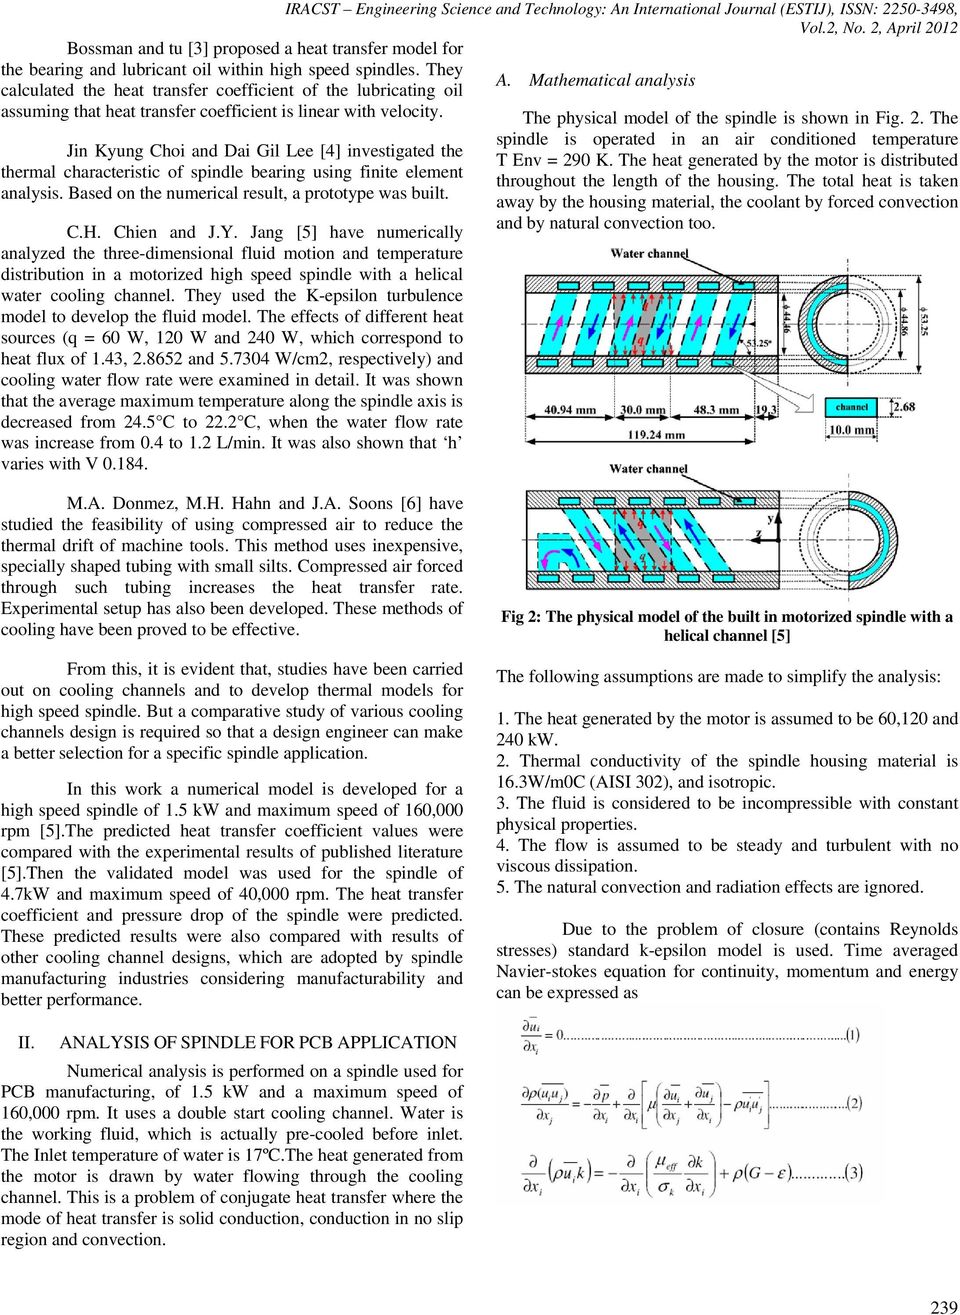 Jin Kyung Choi and Dai Gil Lee [4] investigated the thermal characteristic of spindle bearing using finite element analysis. Based on the numerical result, a prototype was built. C.H. Chien and J.Y.